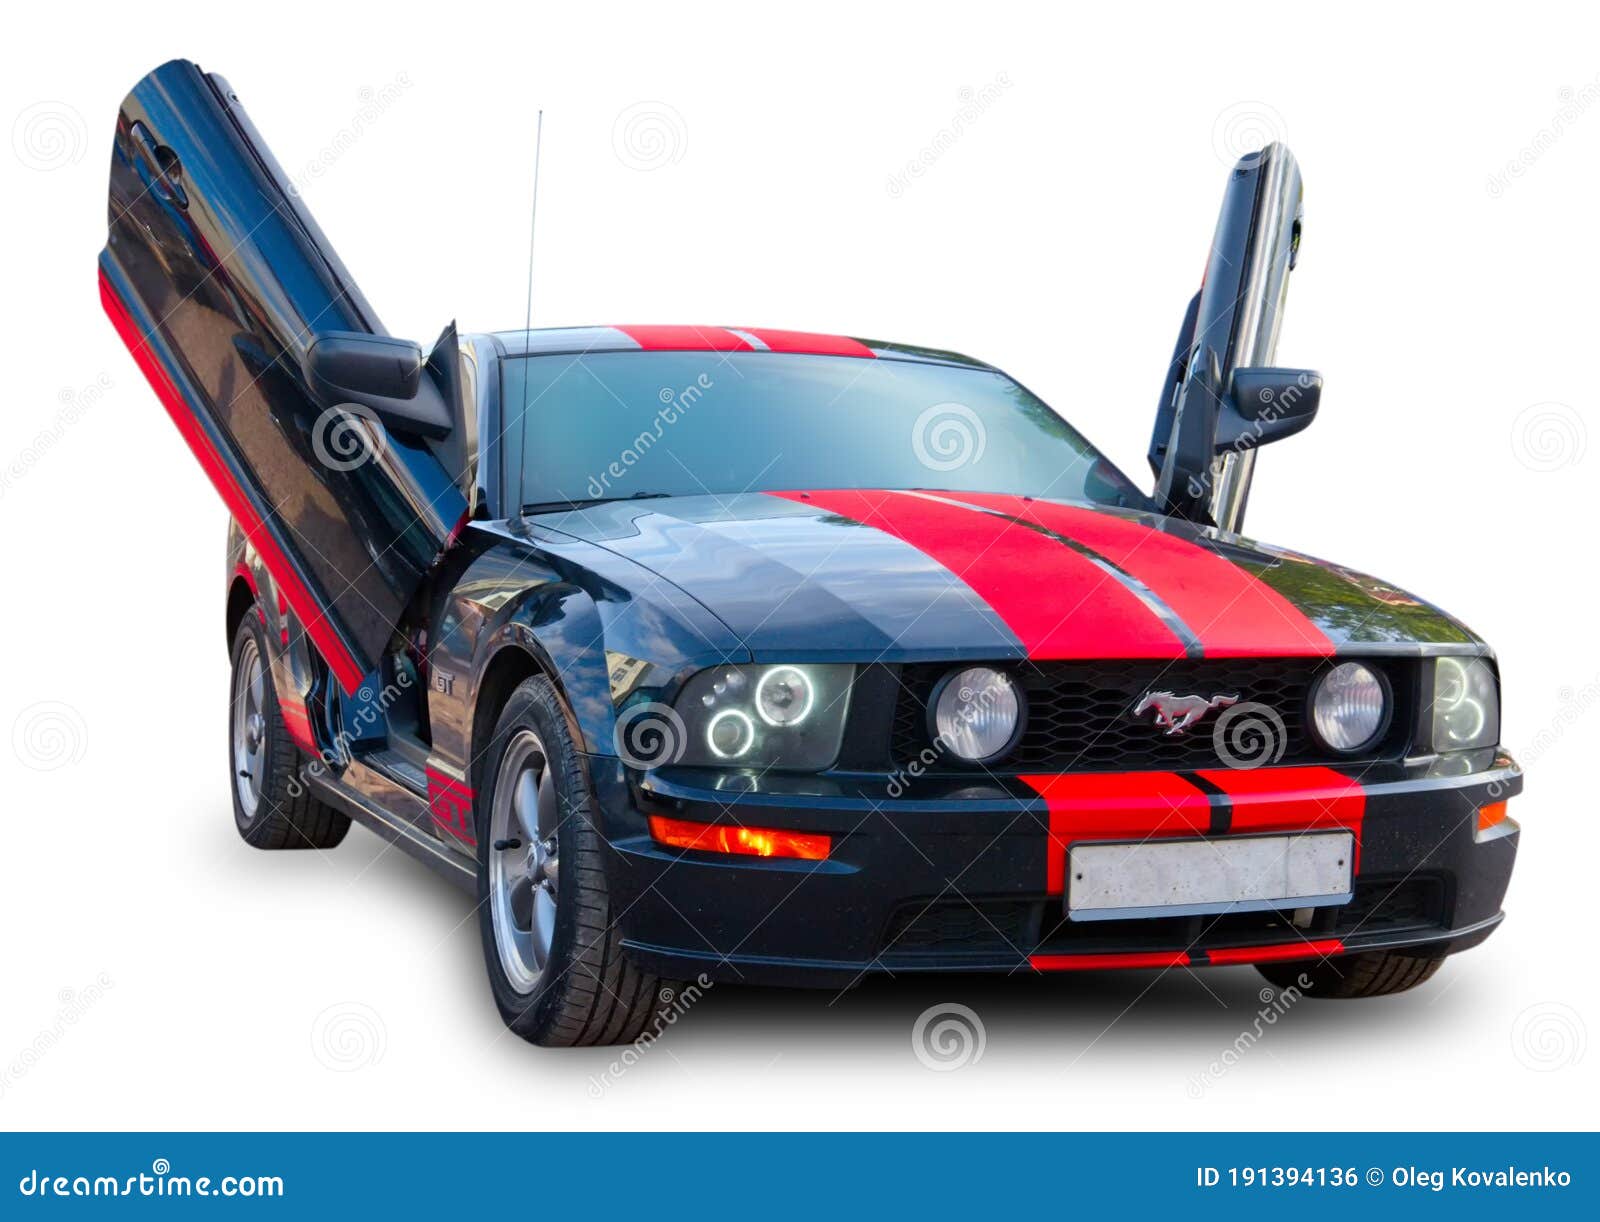 1 296 Car Mustang White Photos Free Royalty Free Stock Photos From Dreamstime